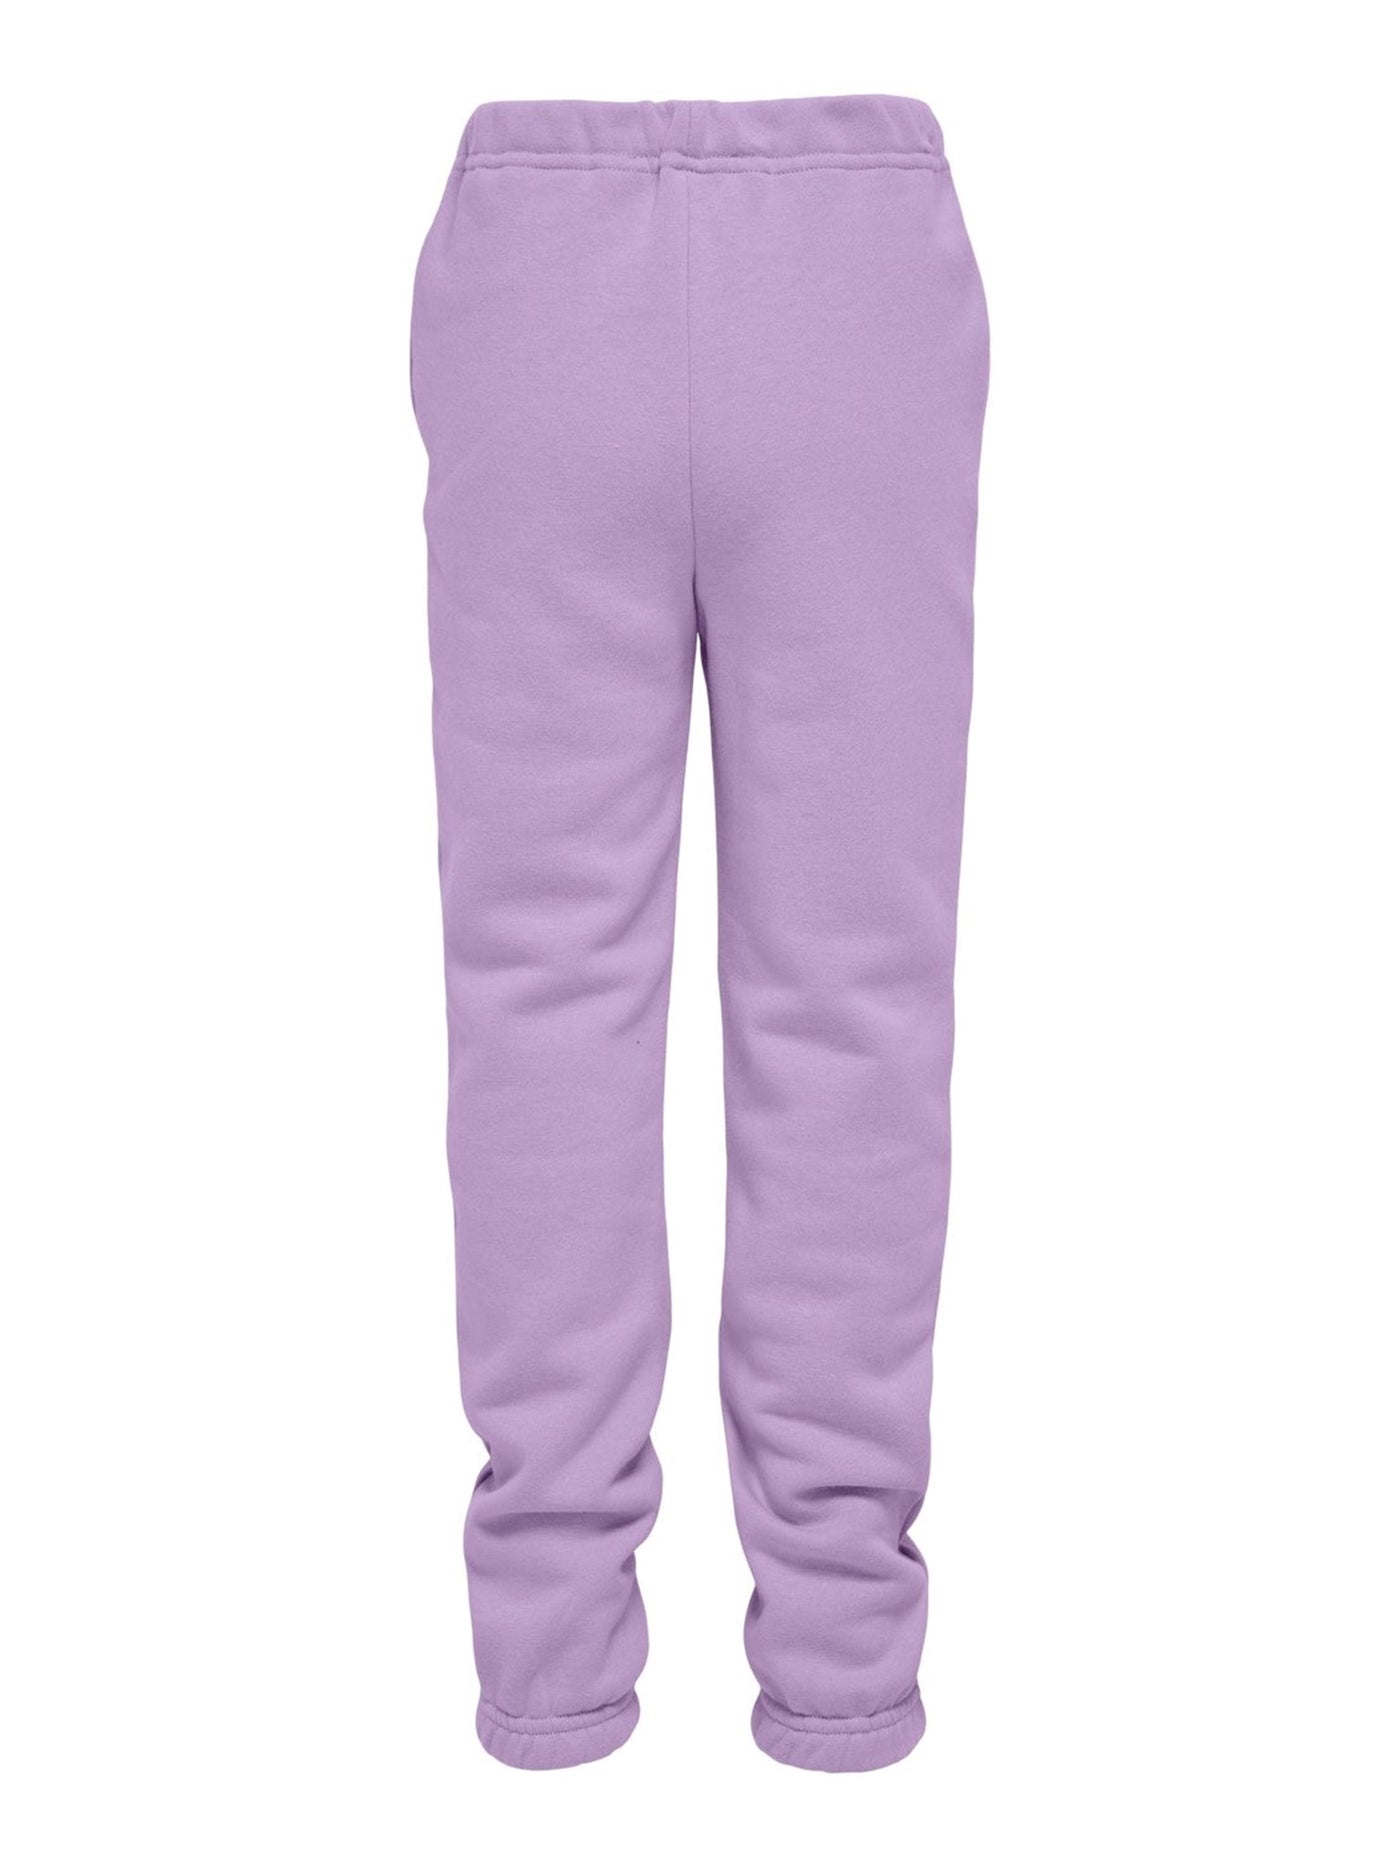 Every Life Trousers - Crocus Petal - Kids Only - Pink 2